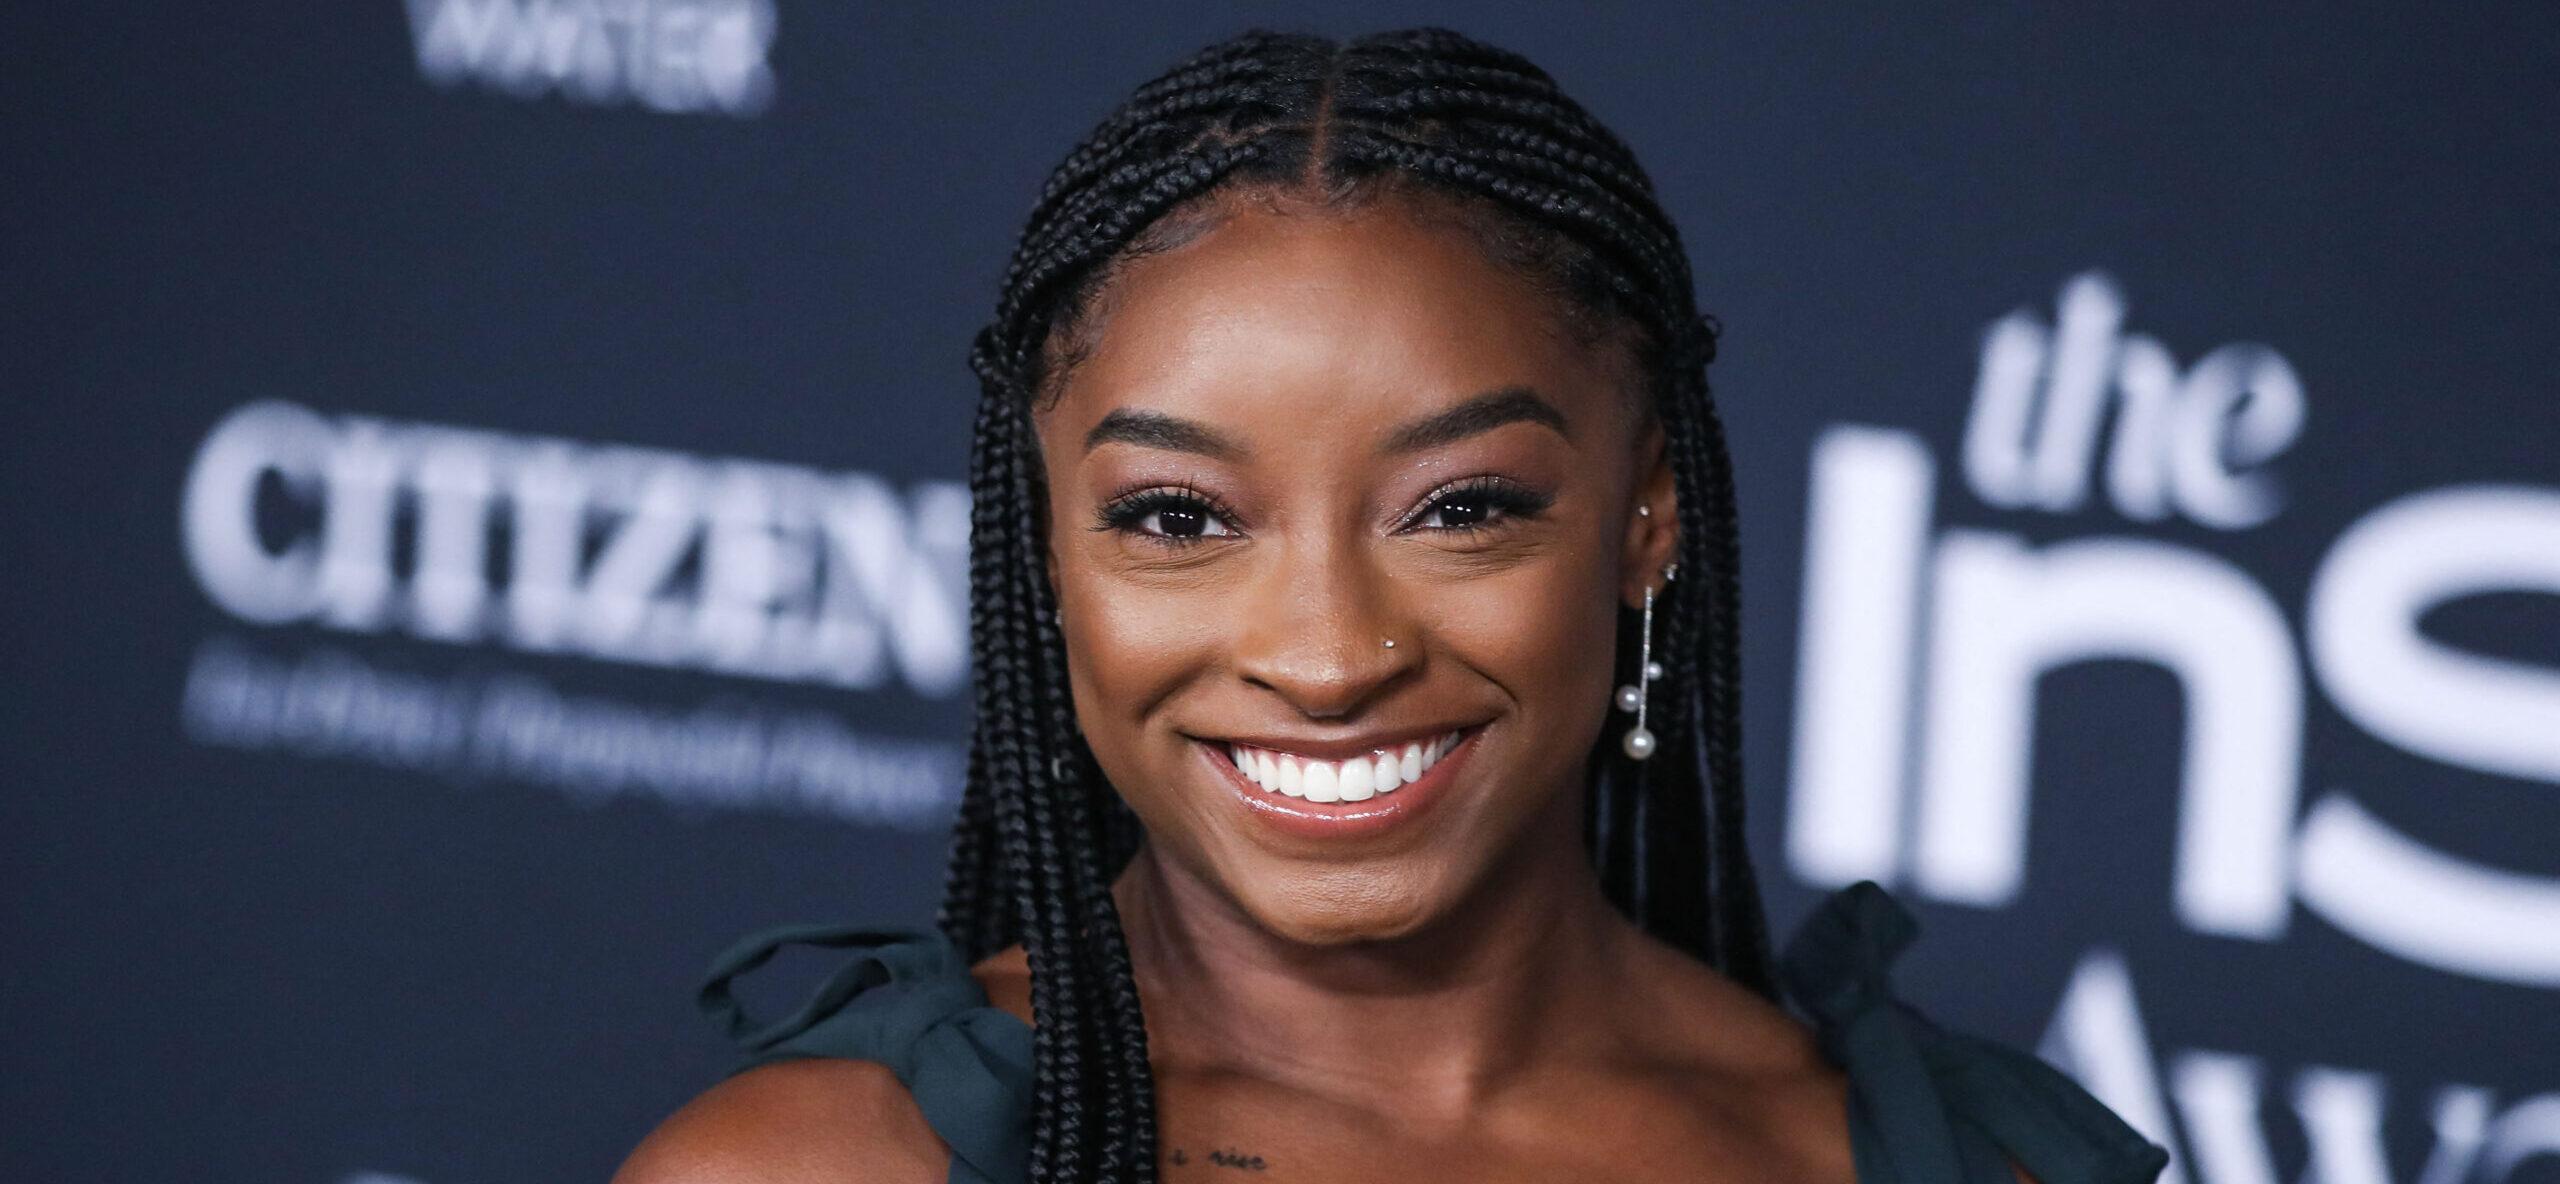 Simone Biles Secures Her Wedding ‘Dresses’ Ahead Of Looming Nuptials To Fiancé